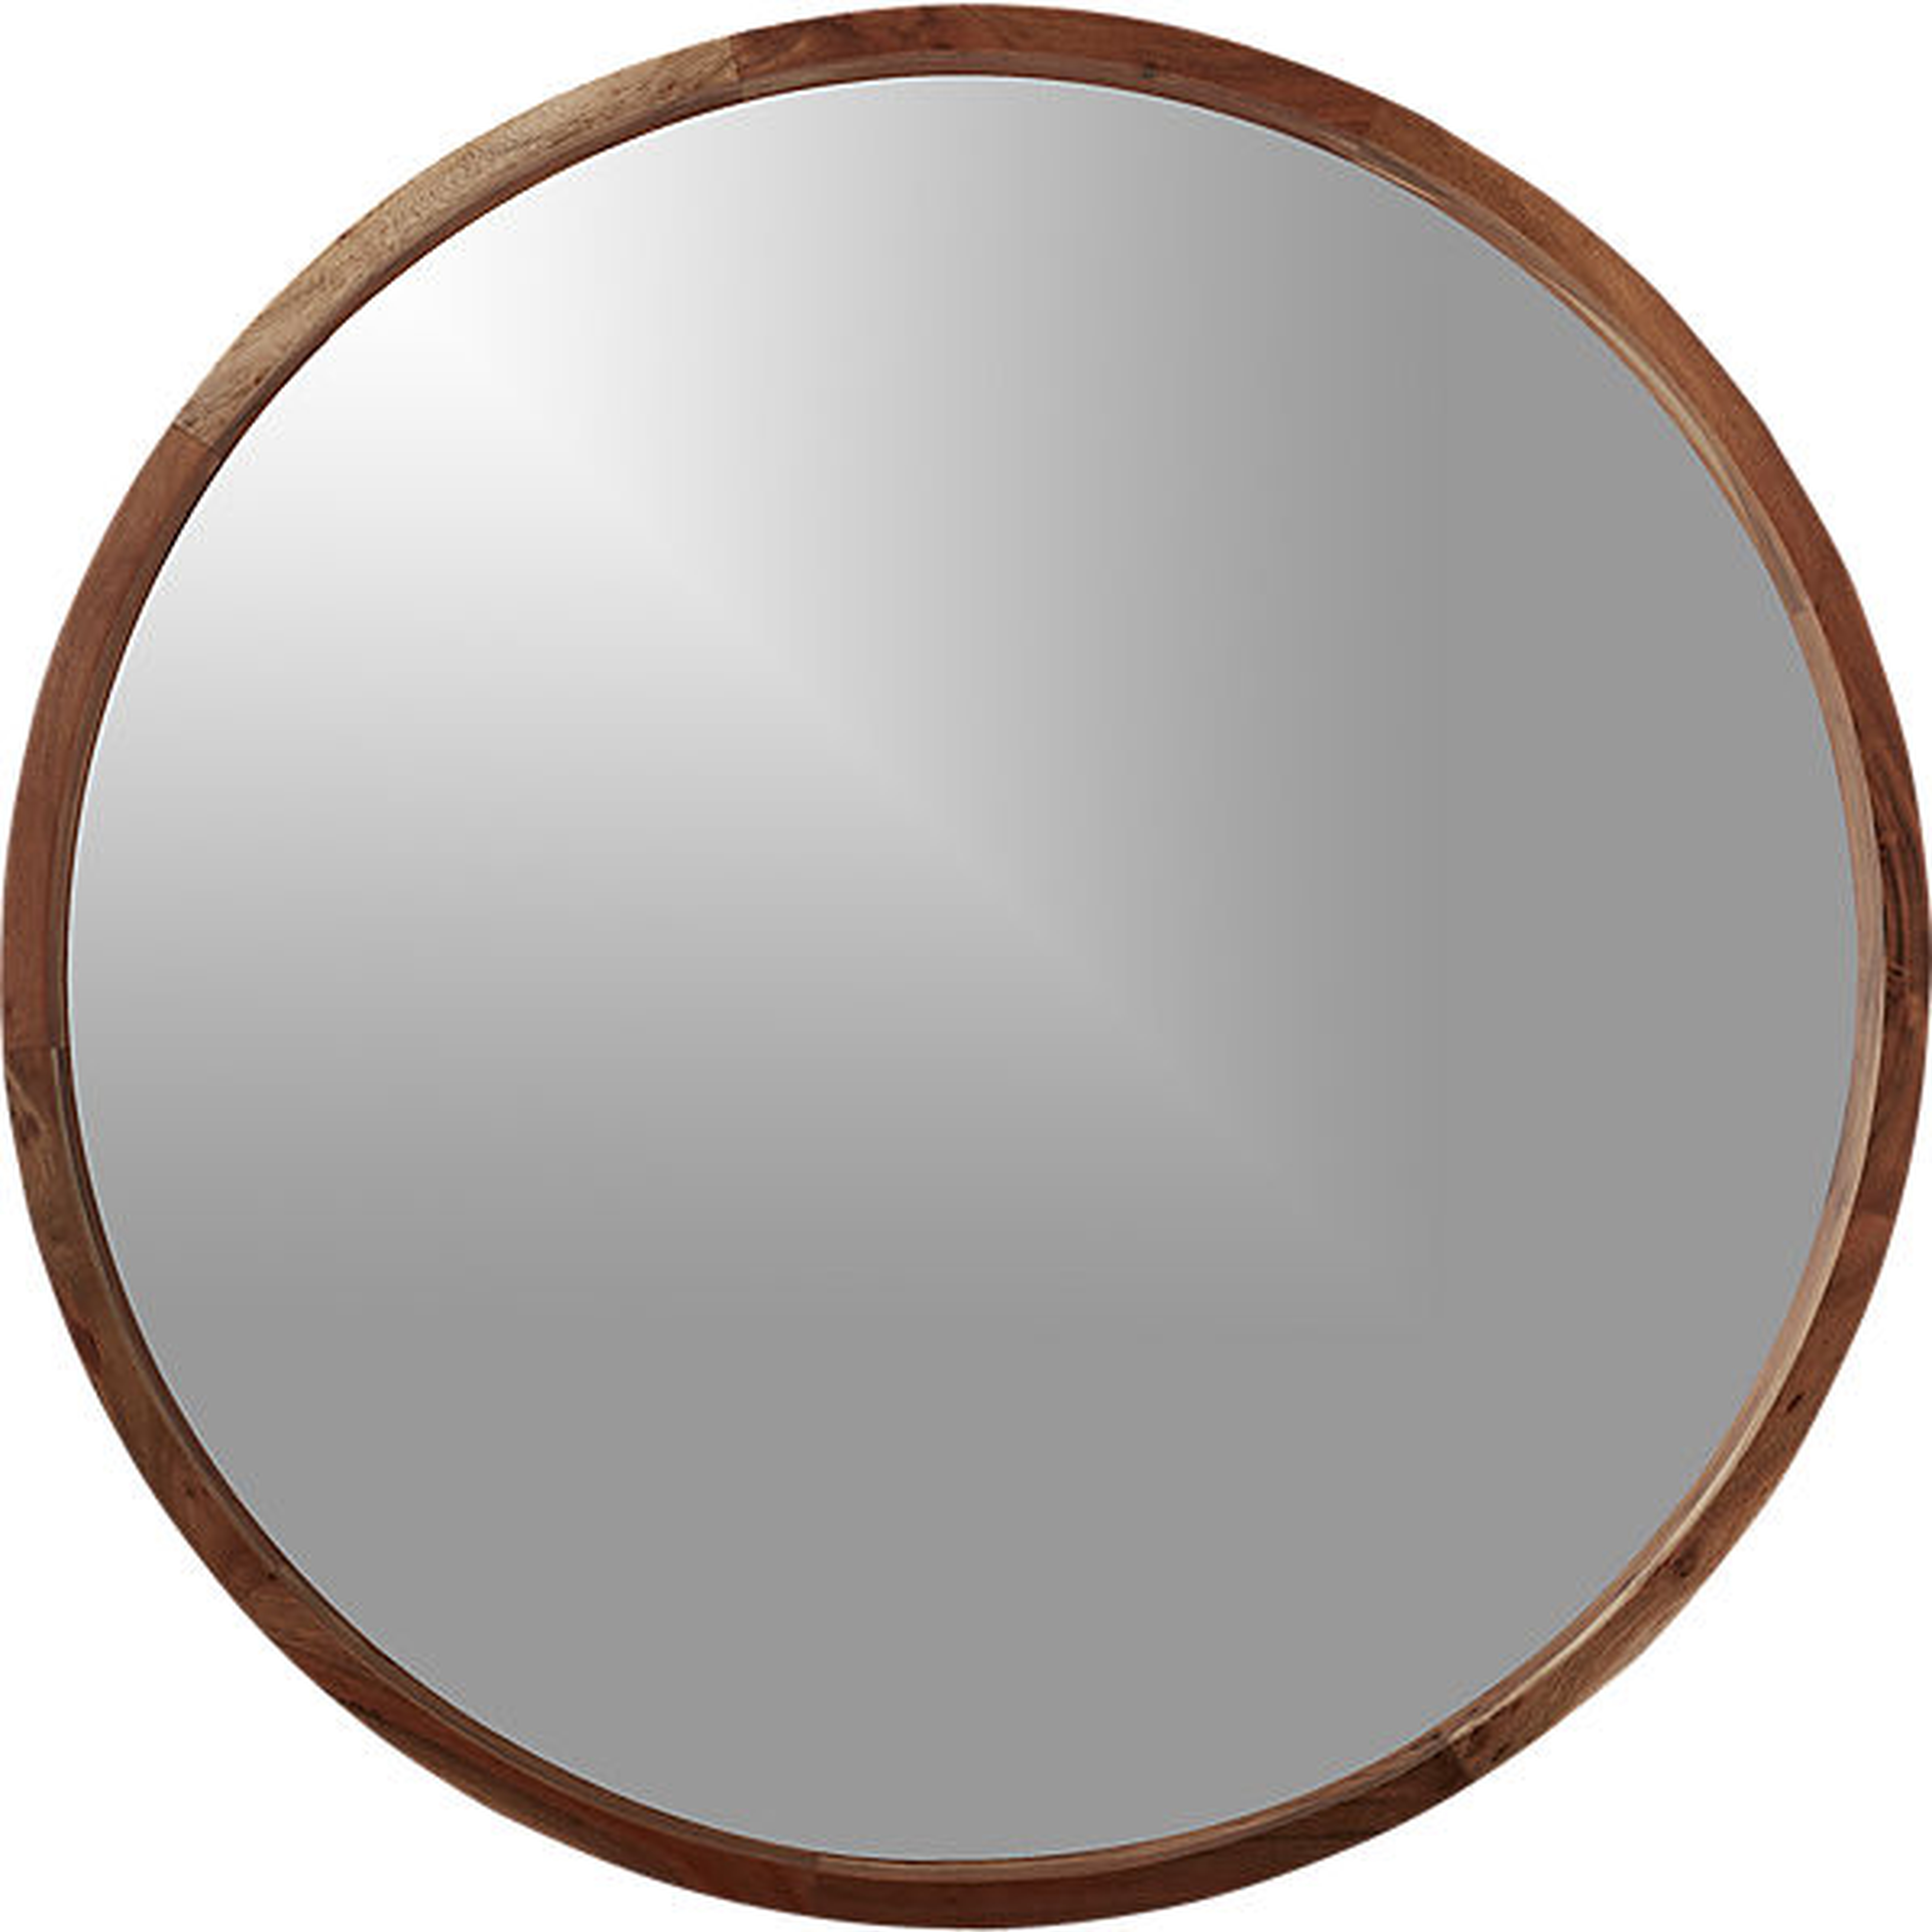 Acacia wood mirror RESTOCK estimated in early September 2023. - CB2